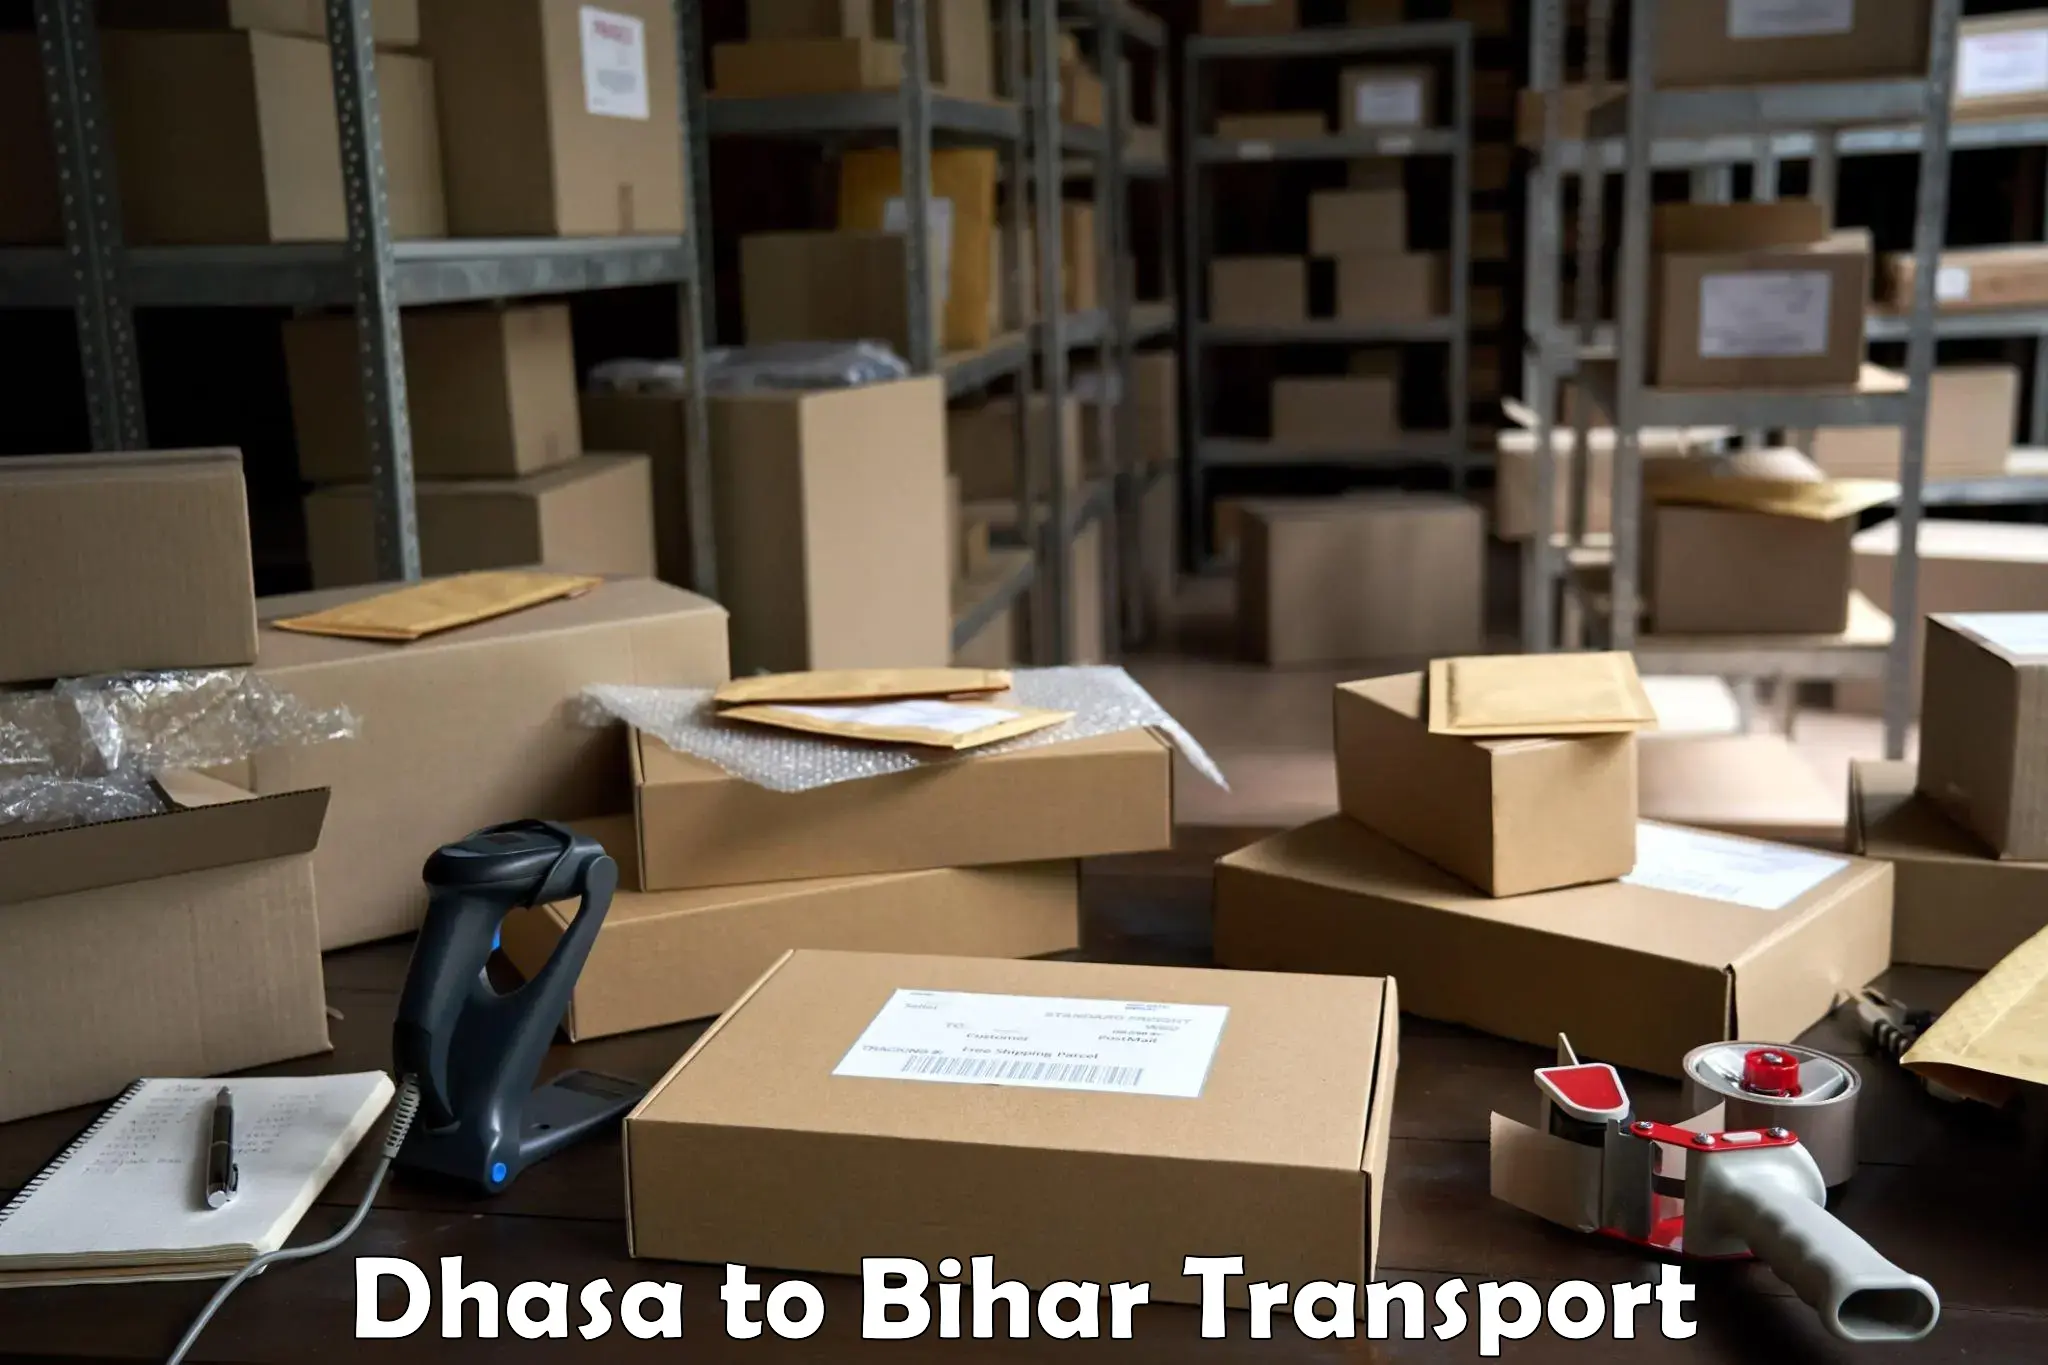 Daily transport service Dhasa to Bihar